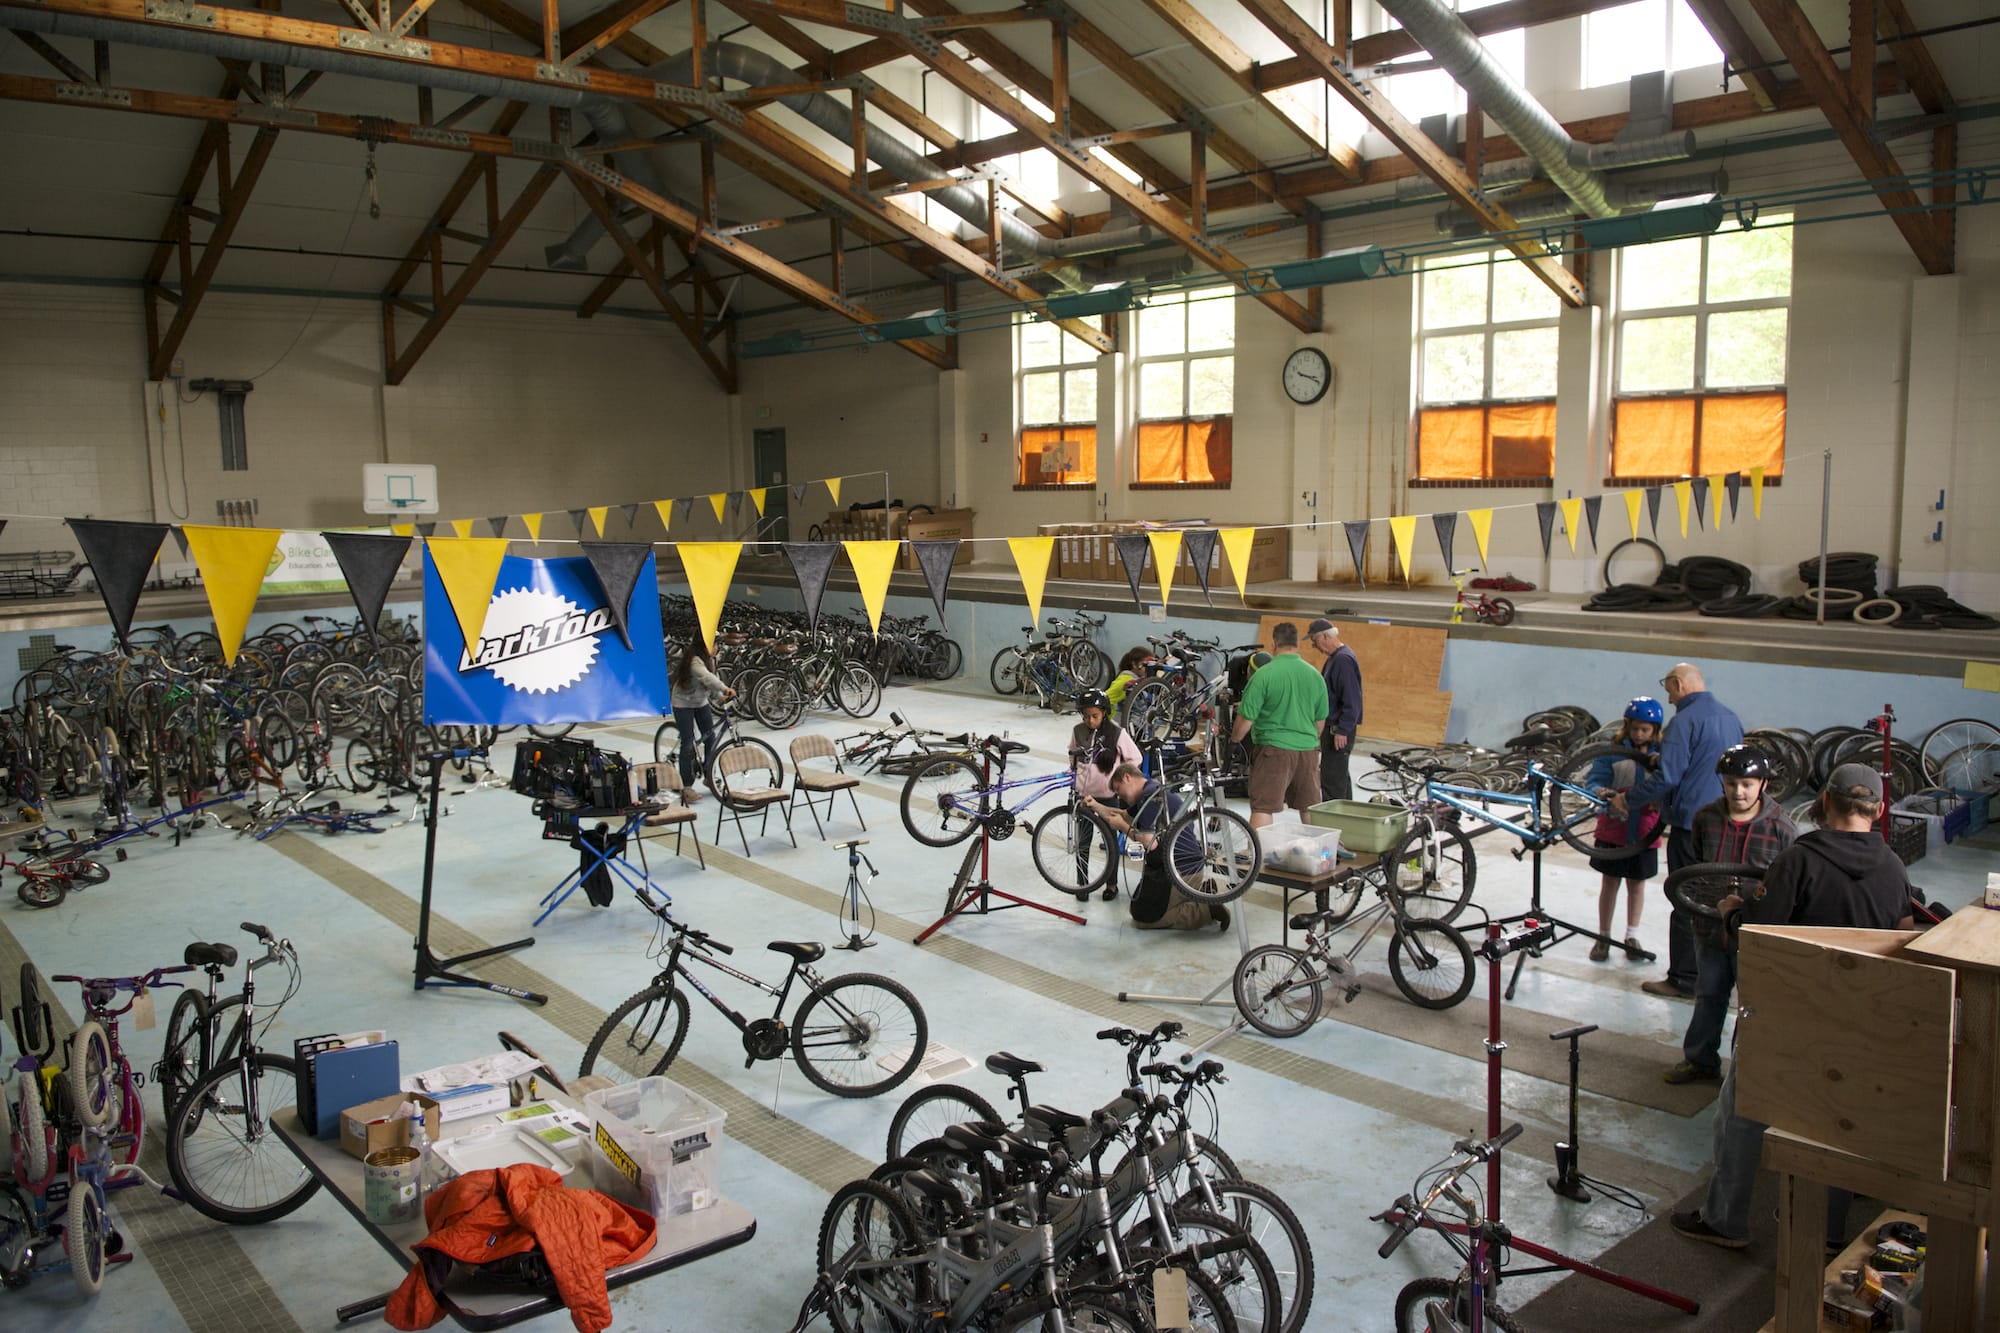 Hough Pool had been the temporary home of nonprofit Bike Clark County's fleet of bikes.